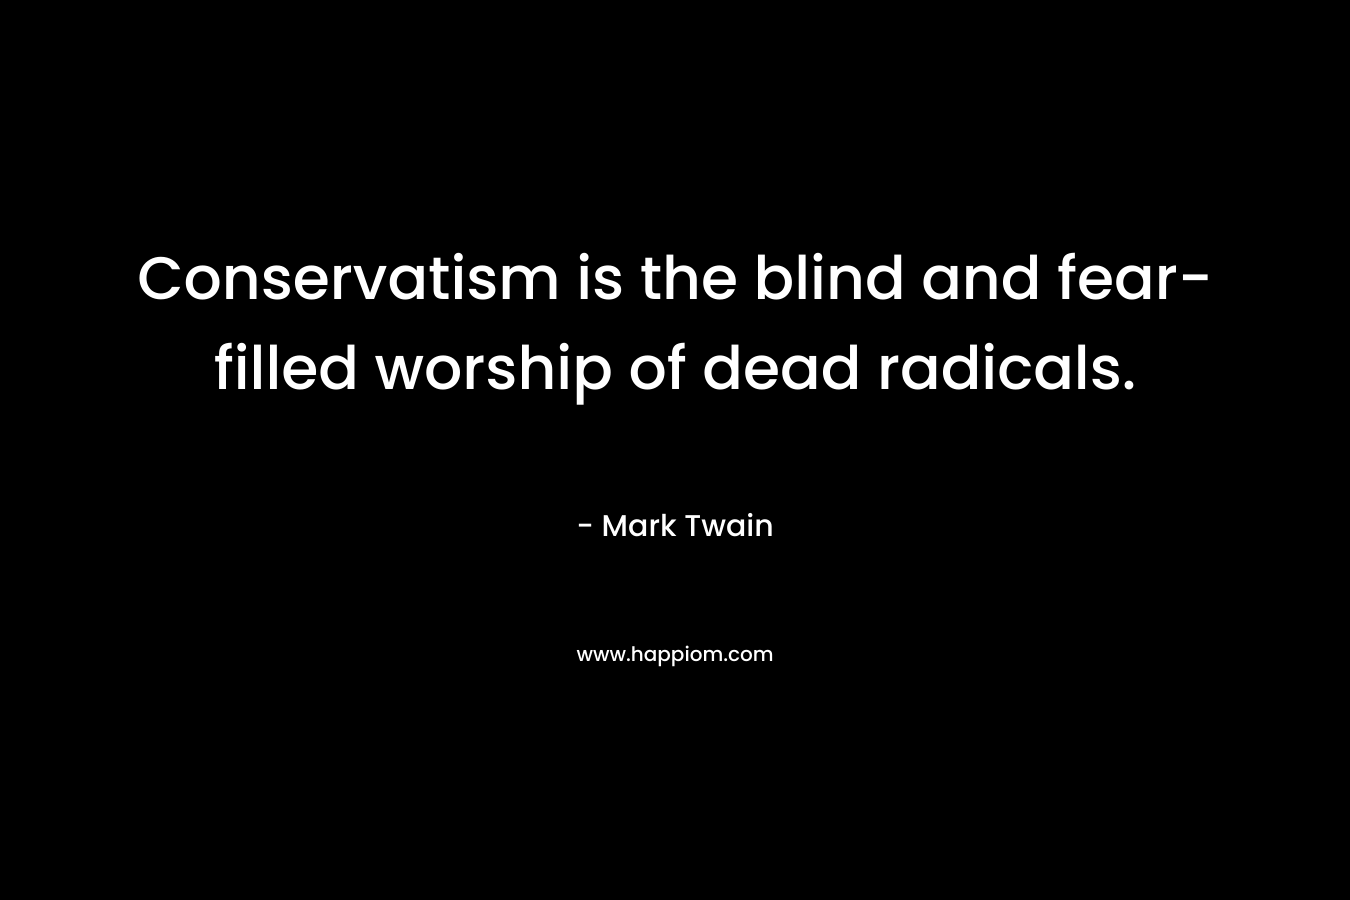 Conservatism is the blind and fear-filled worship of dead radicals.